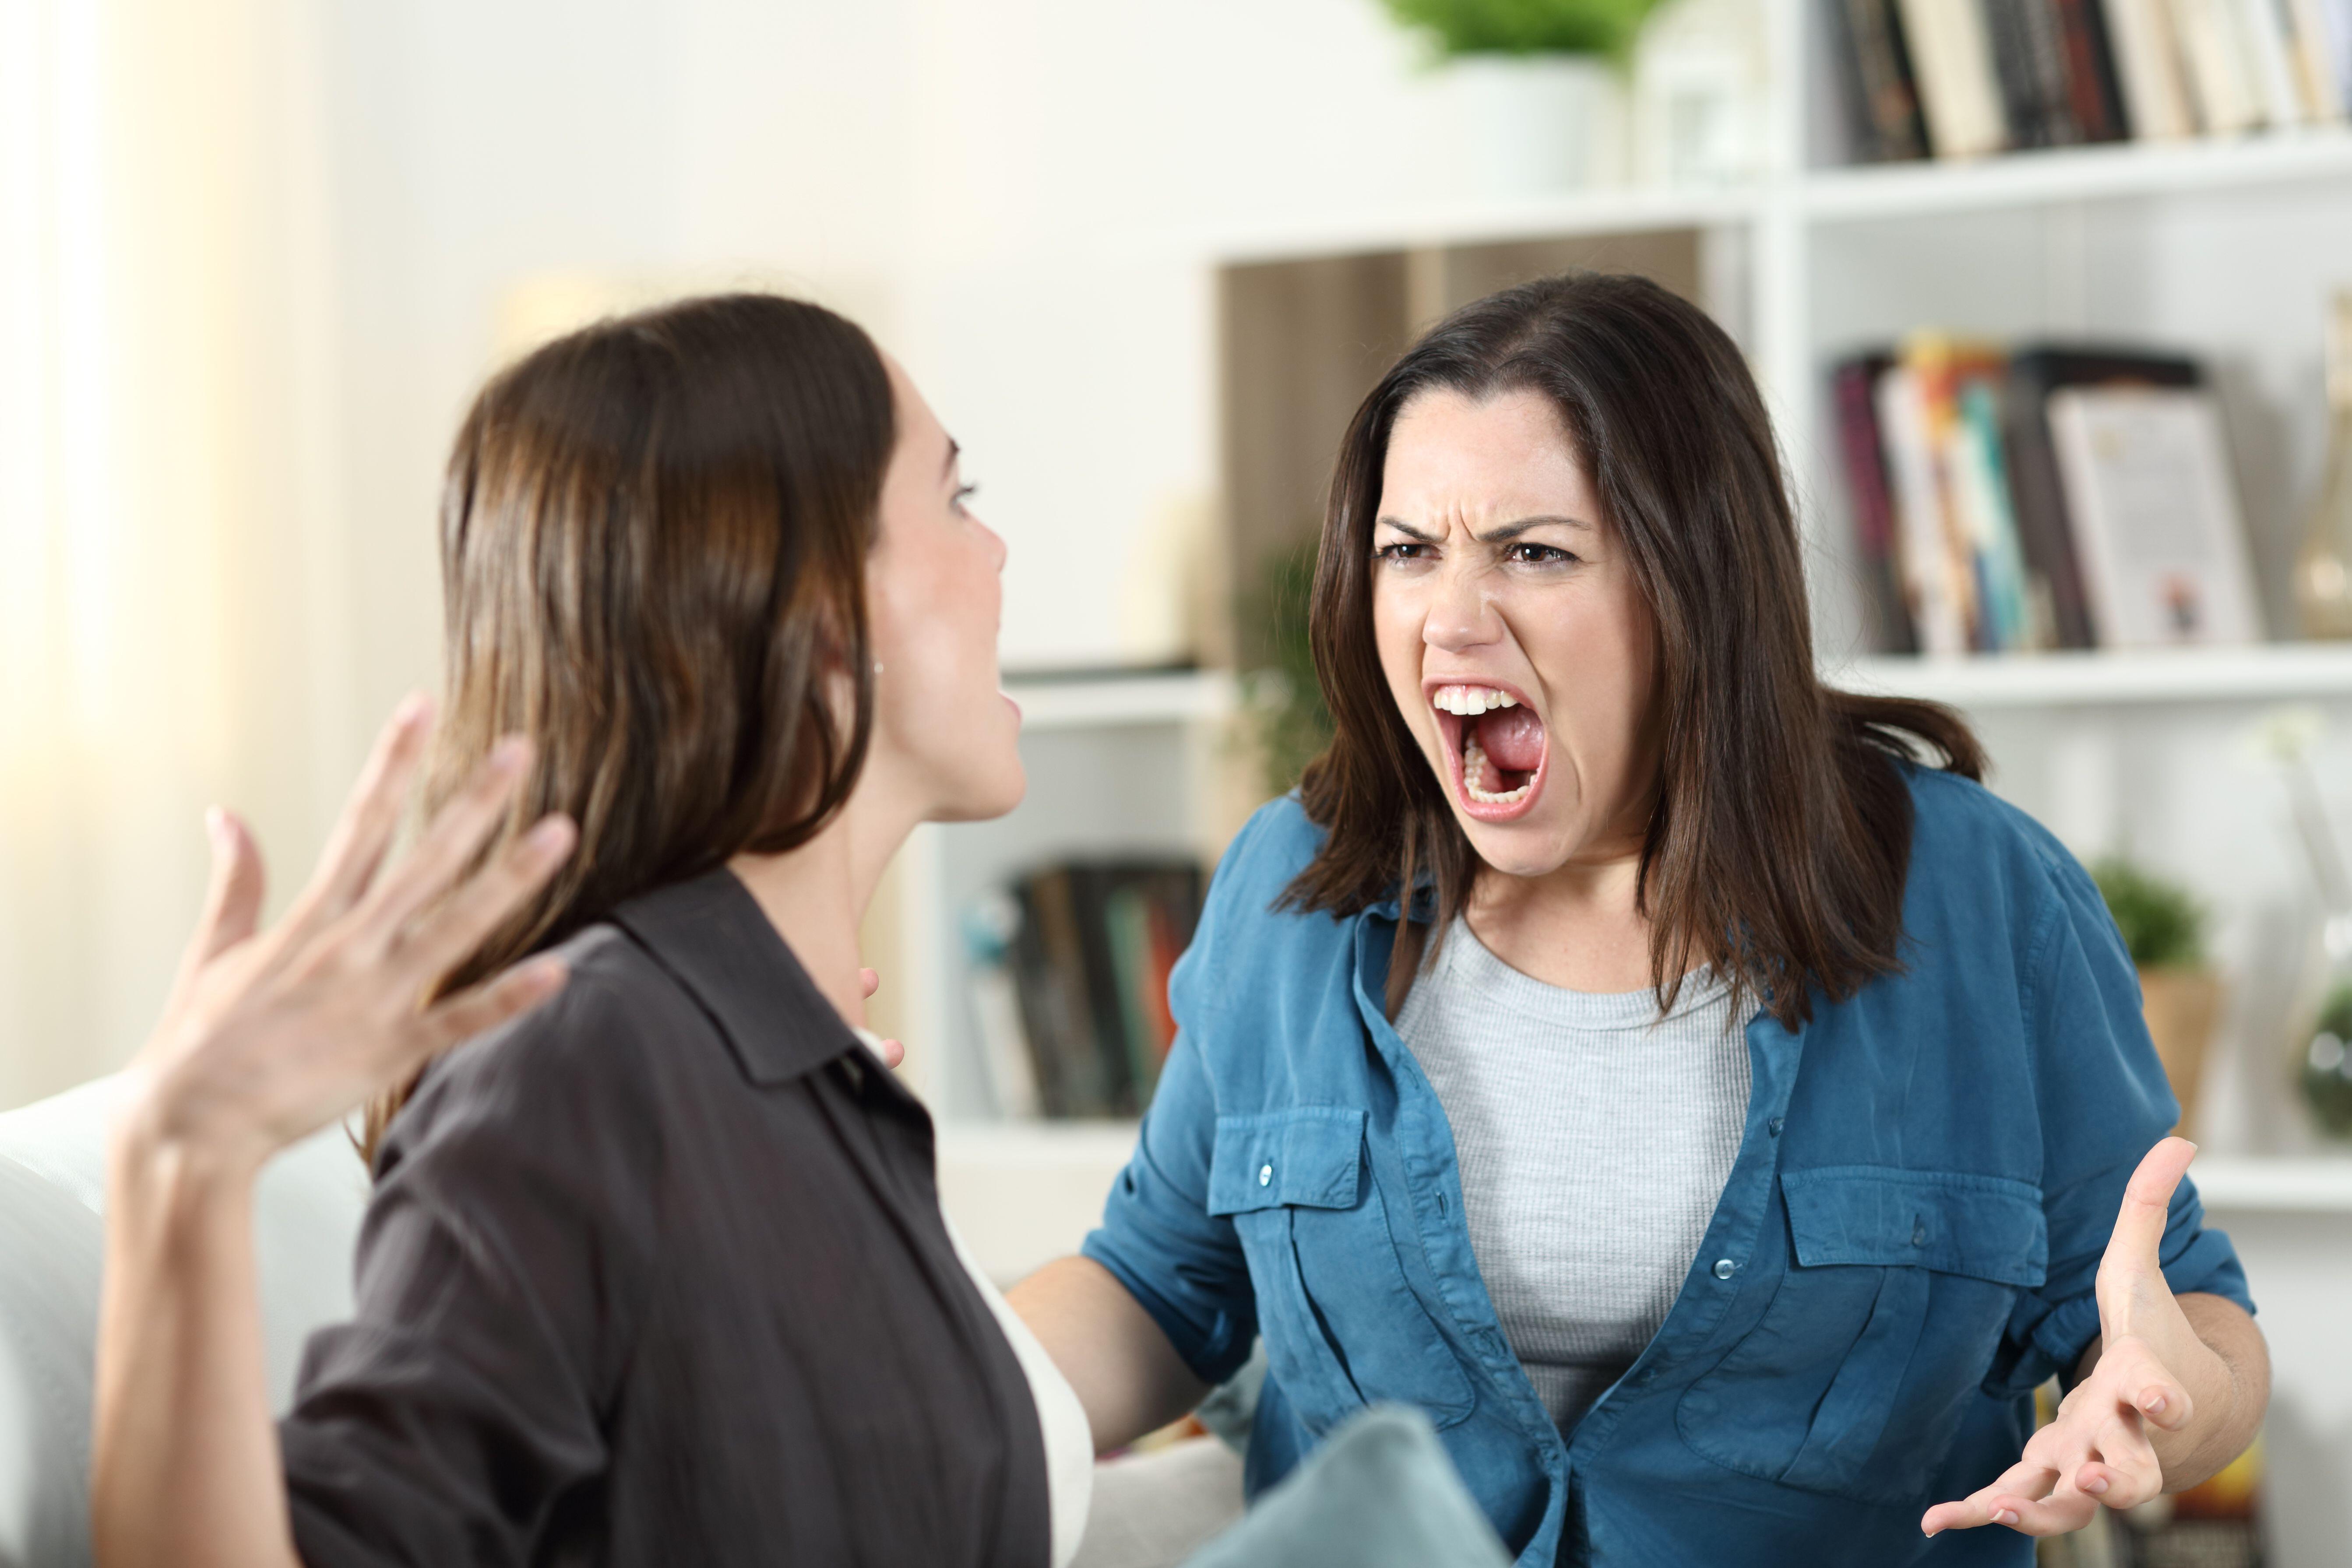 Shouting insults and abuse will quickly escalate the conversation into an argument (Alamy/ PA)